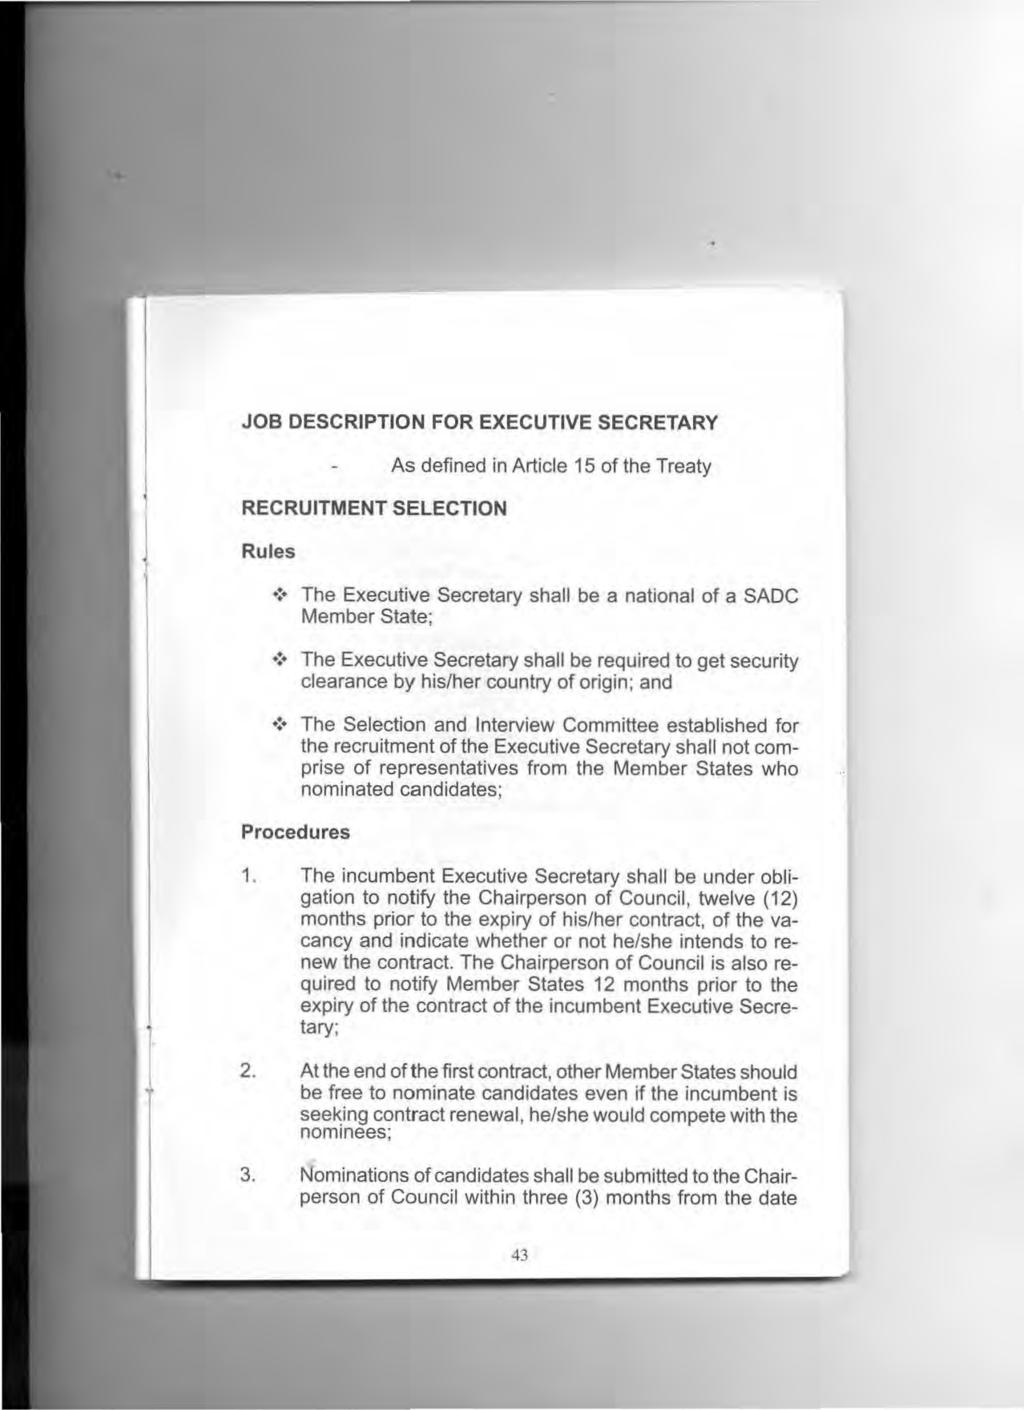 JOB DESCRIPTION FOR EXECUTIVE SECRETARY RECRUITMENT SELECTION Rules As defined in Article 15 of the Treaty!